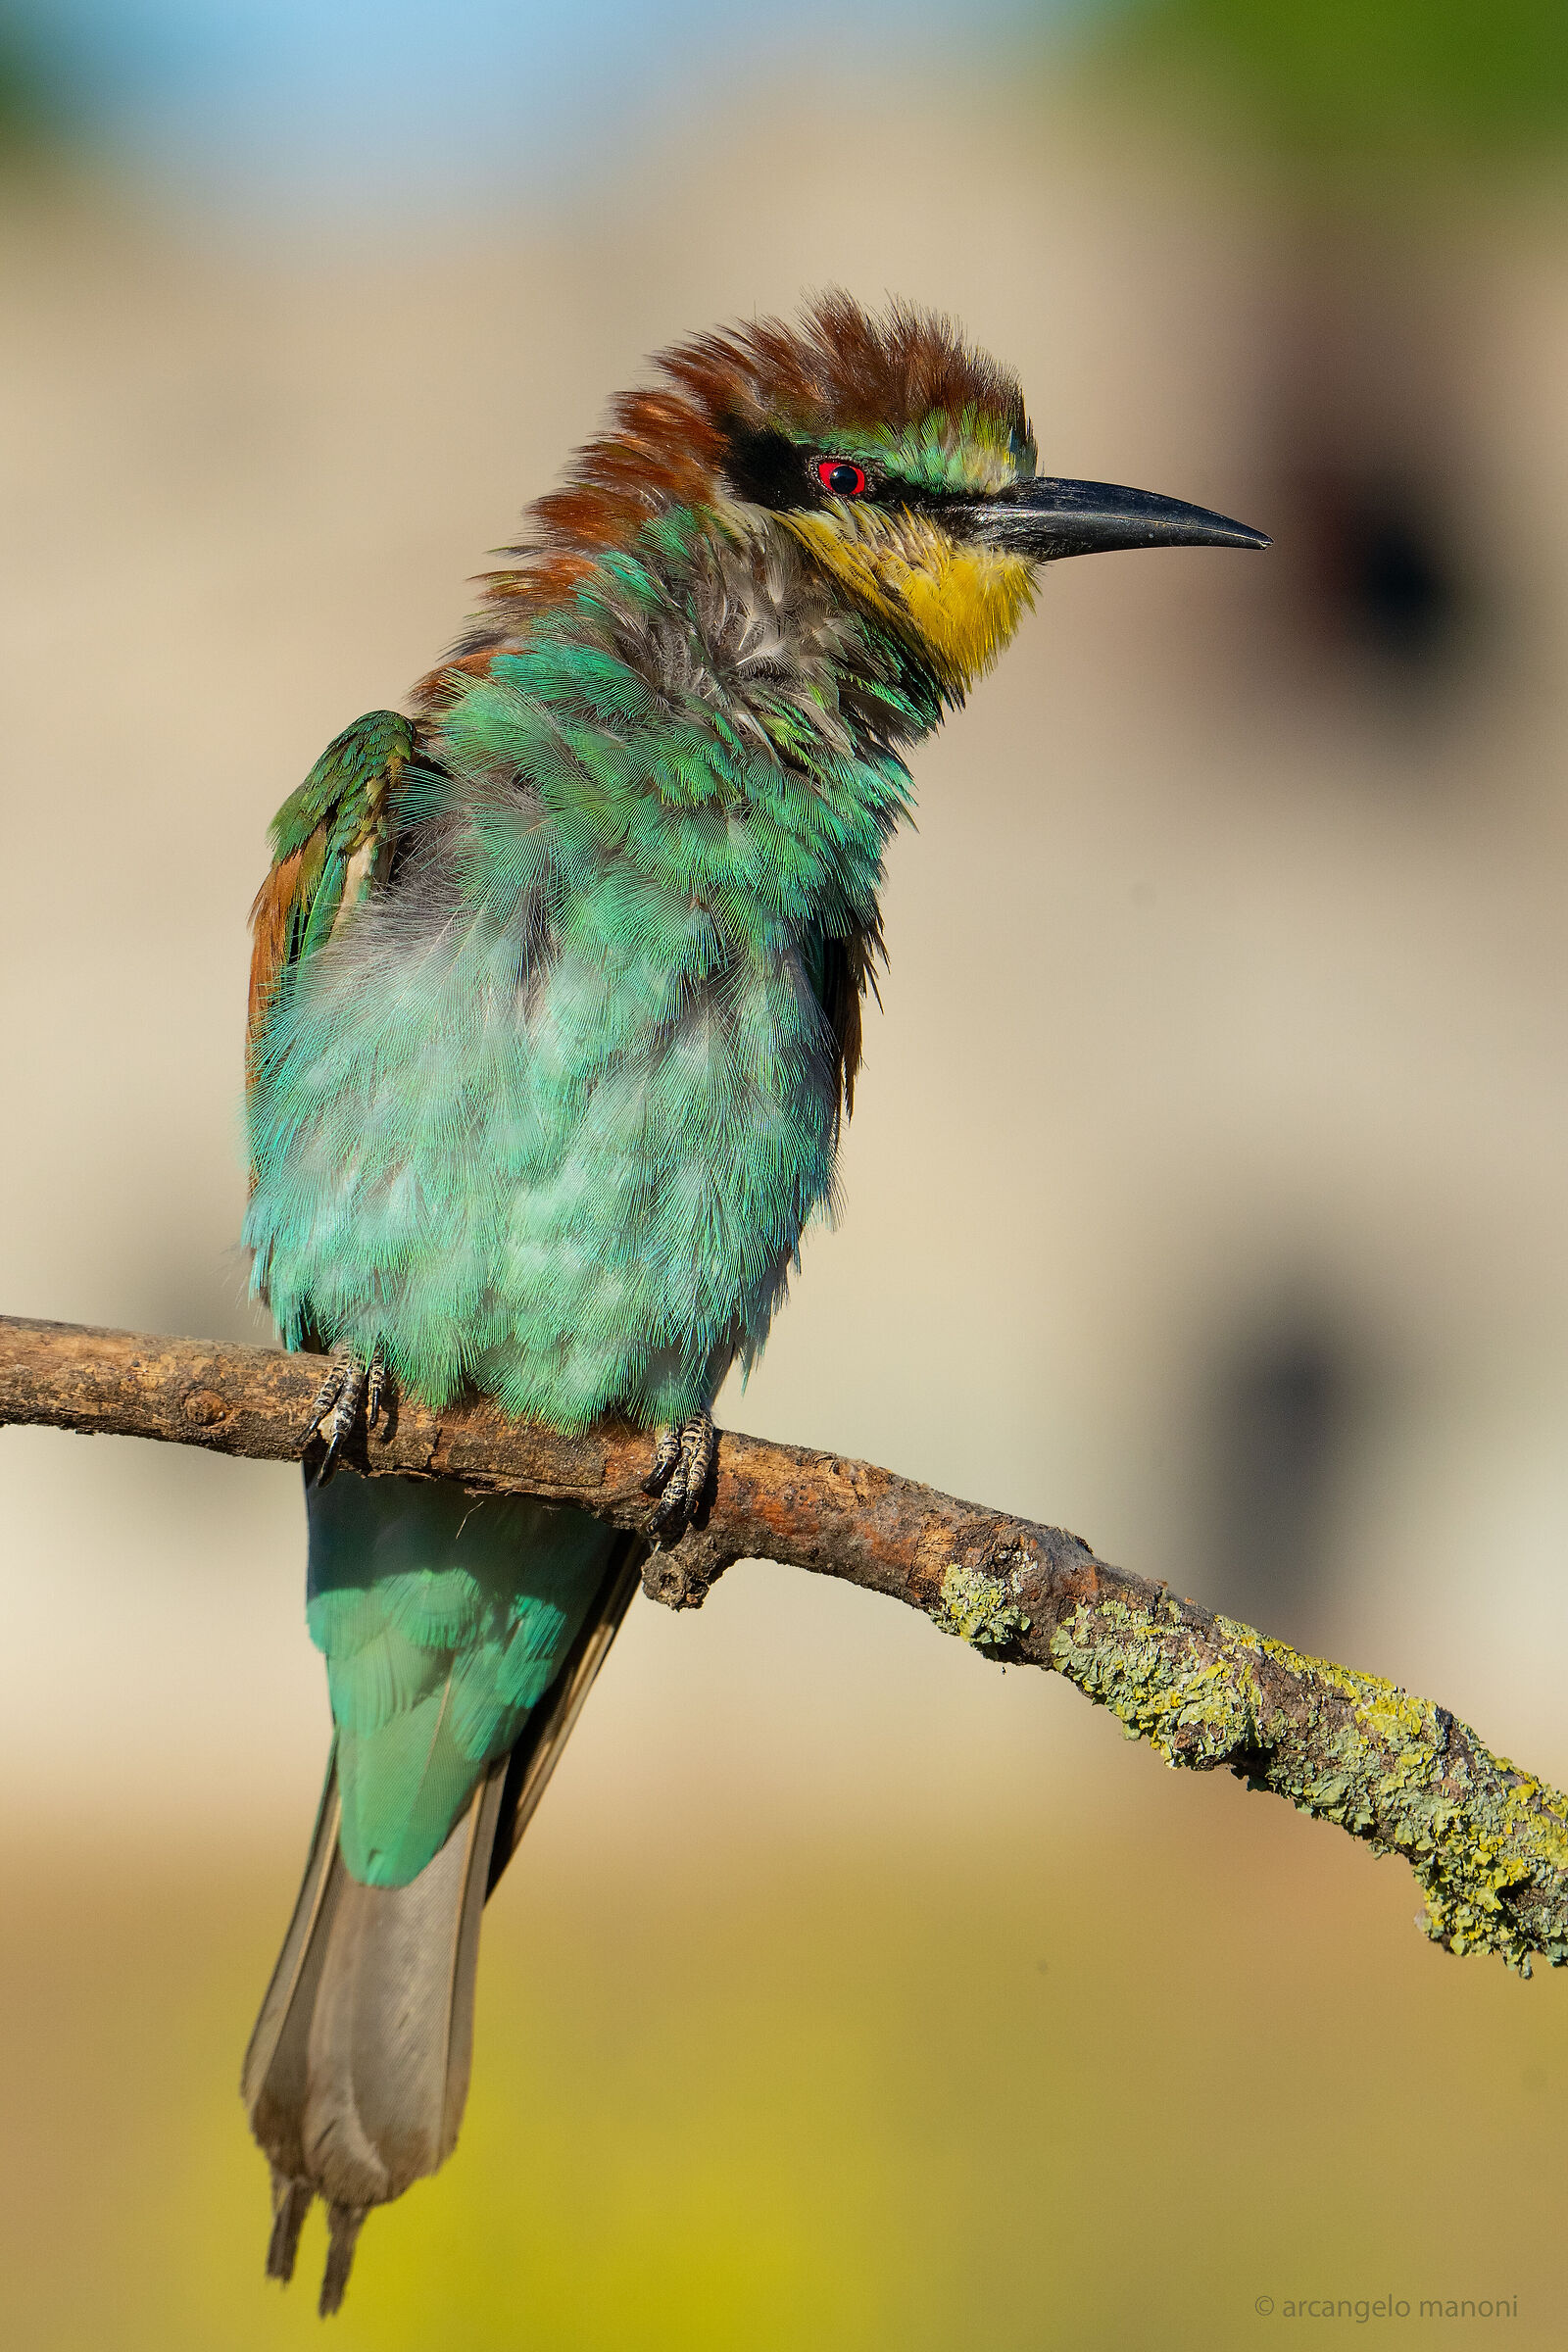 A funny bee-eater...